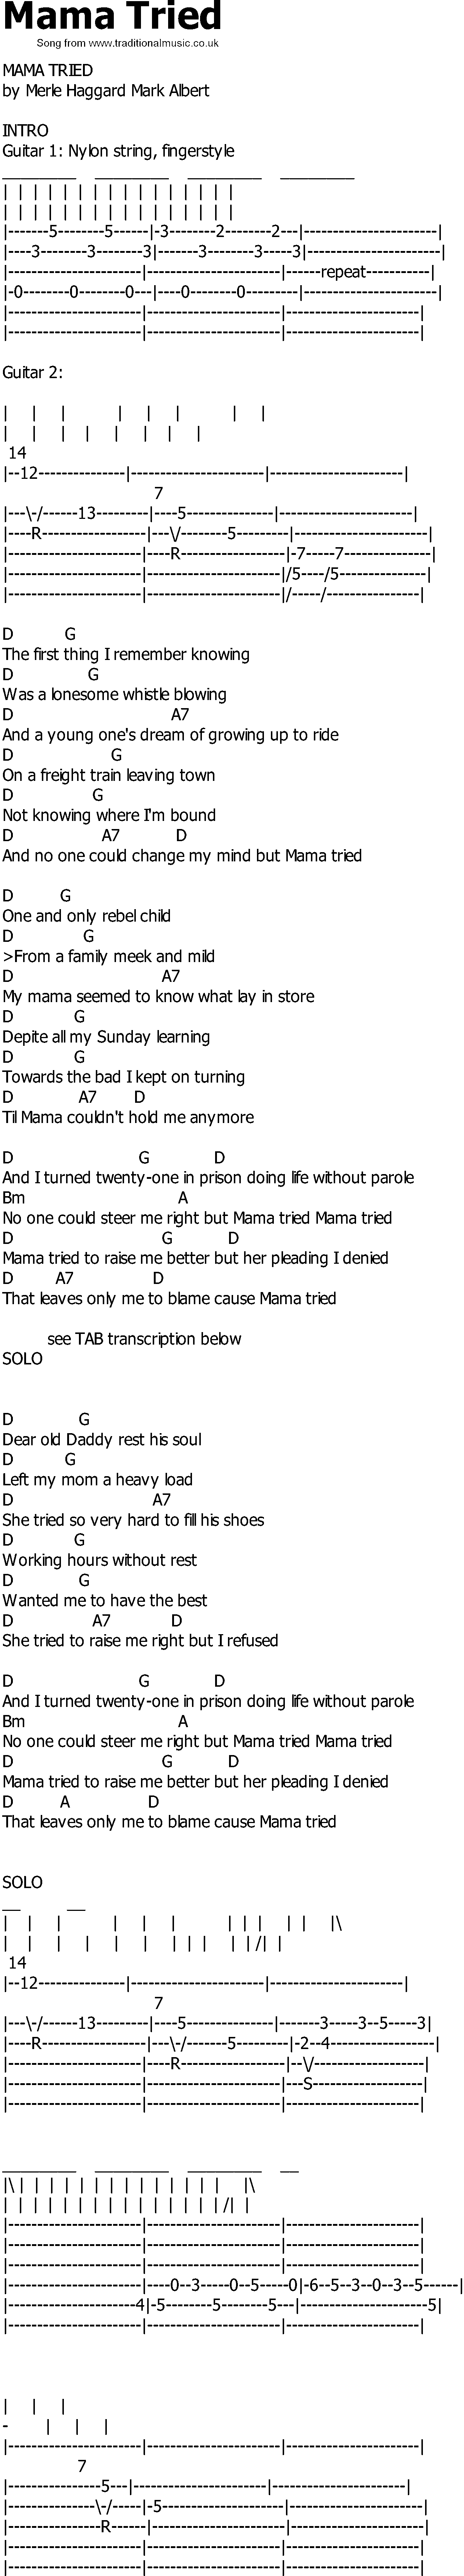 Old Country song lyrics with chords - Mama Tried